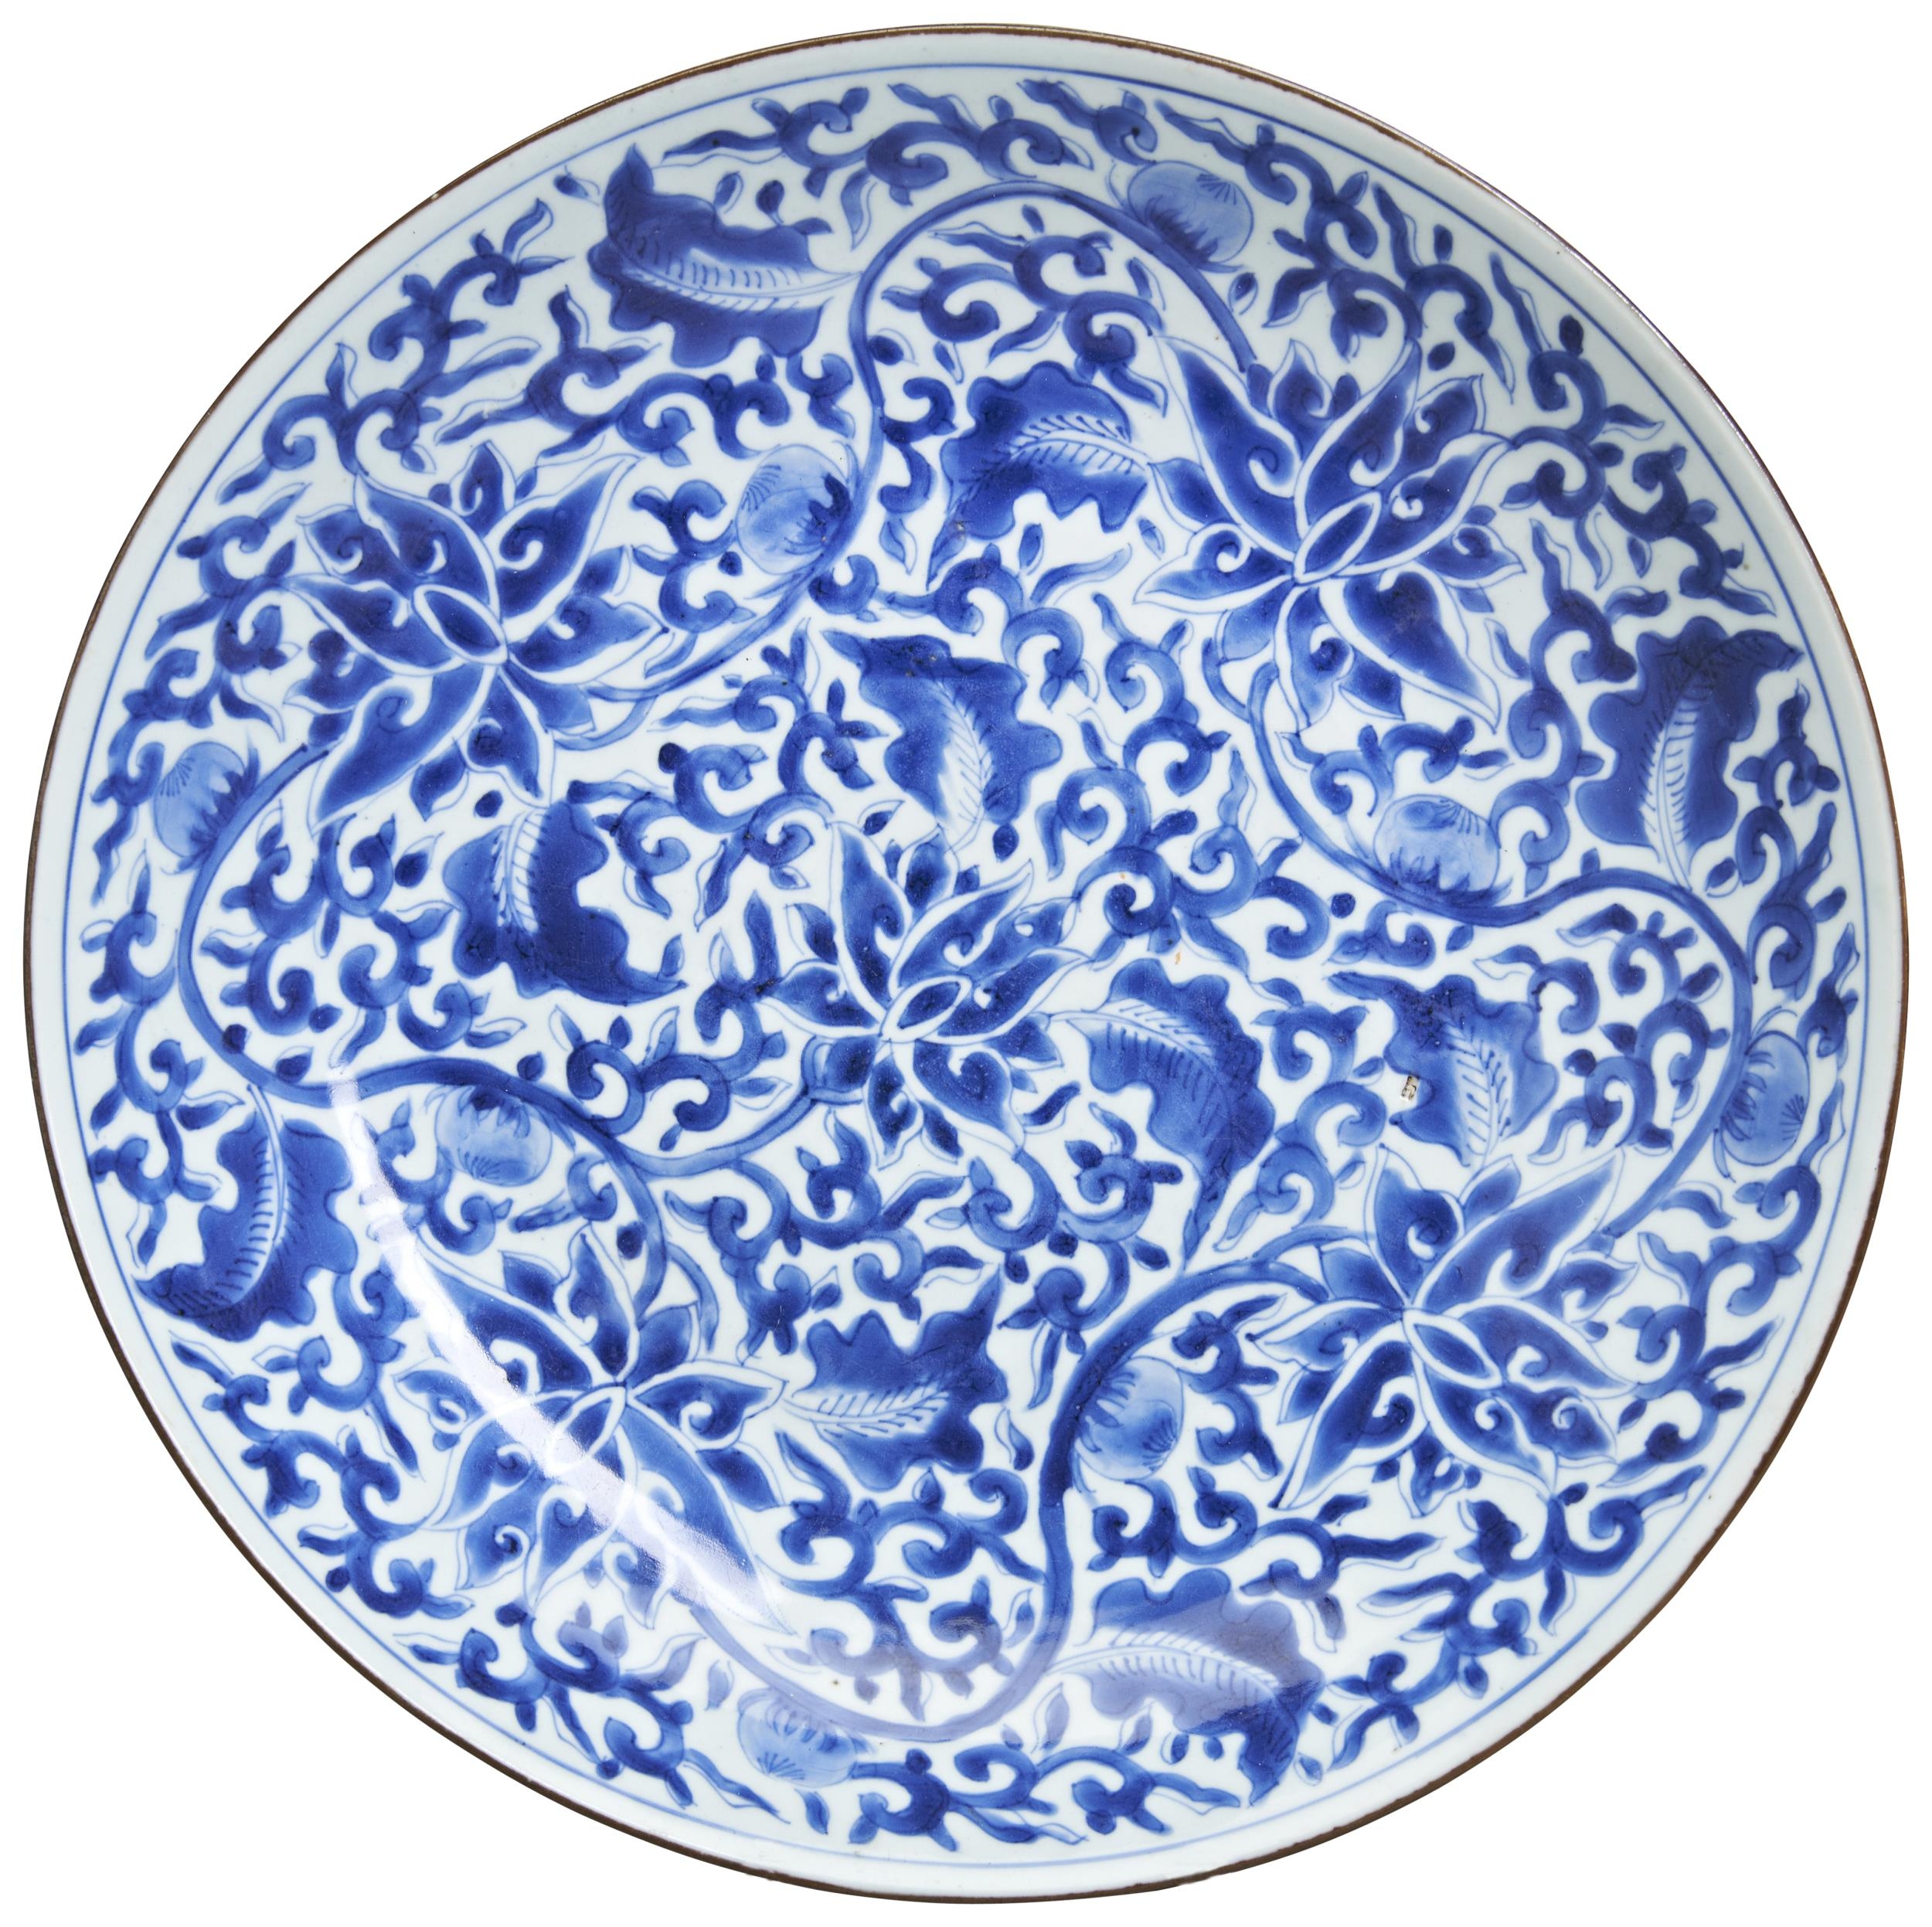 A LARGE BLUE AND WHITE 'LOTUS' DISH YU TANG JIA QI MARK (BEAUTIFUL VESSEL FOR THE JADE HALL), MID